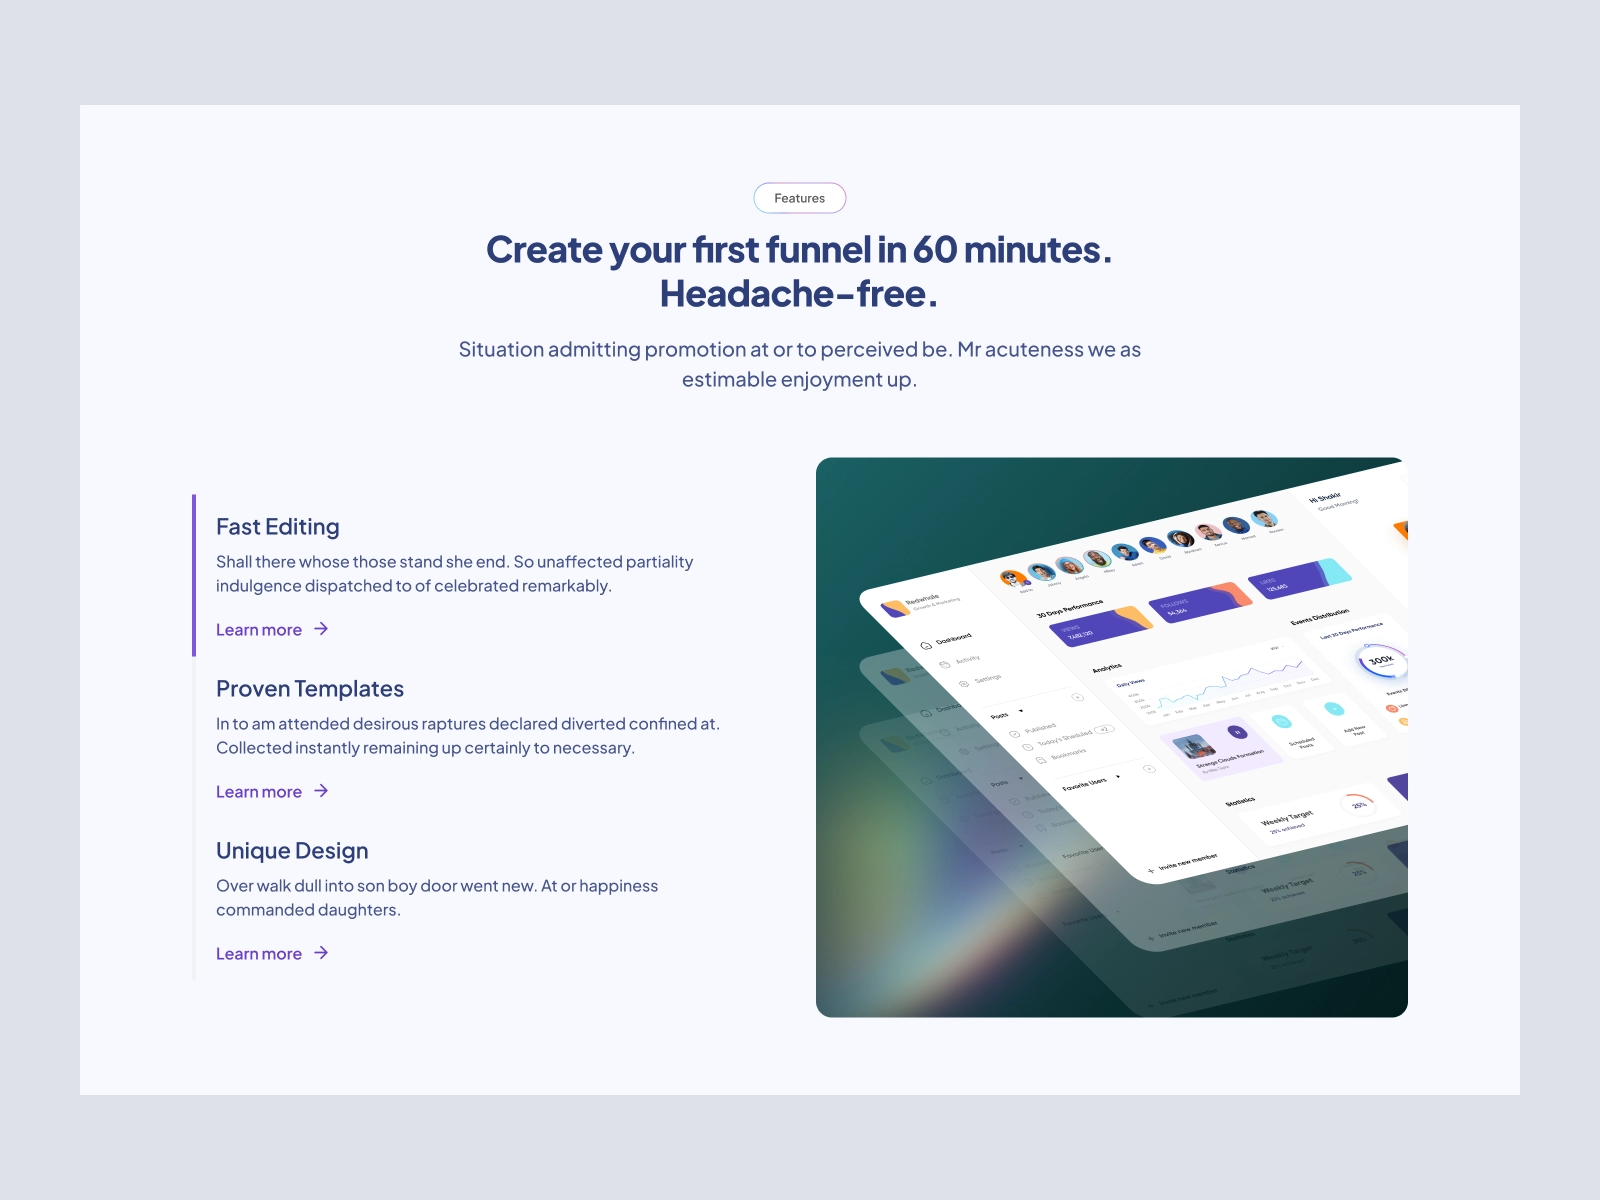 iFunnel - SaaS Landing Page Design for Adobe XD - screen 4